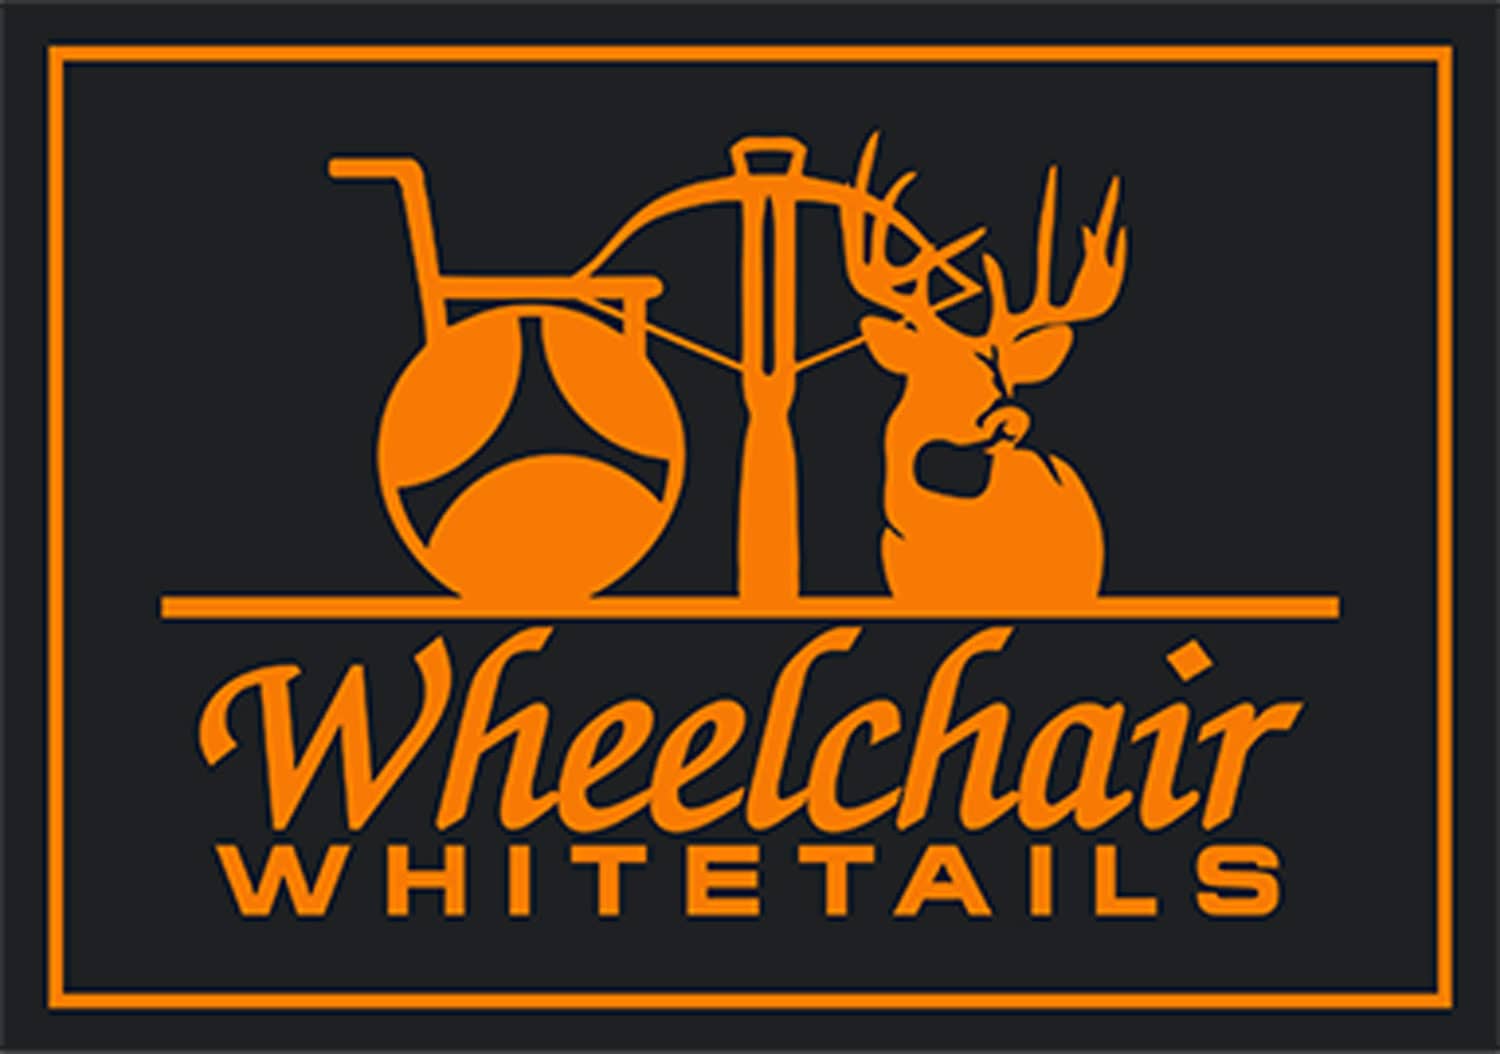 Wheelchair Whitetails Logo onsite COMP